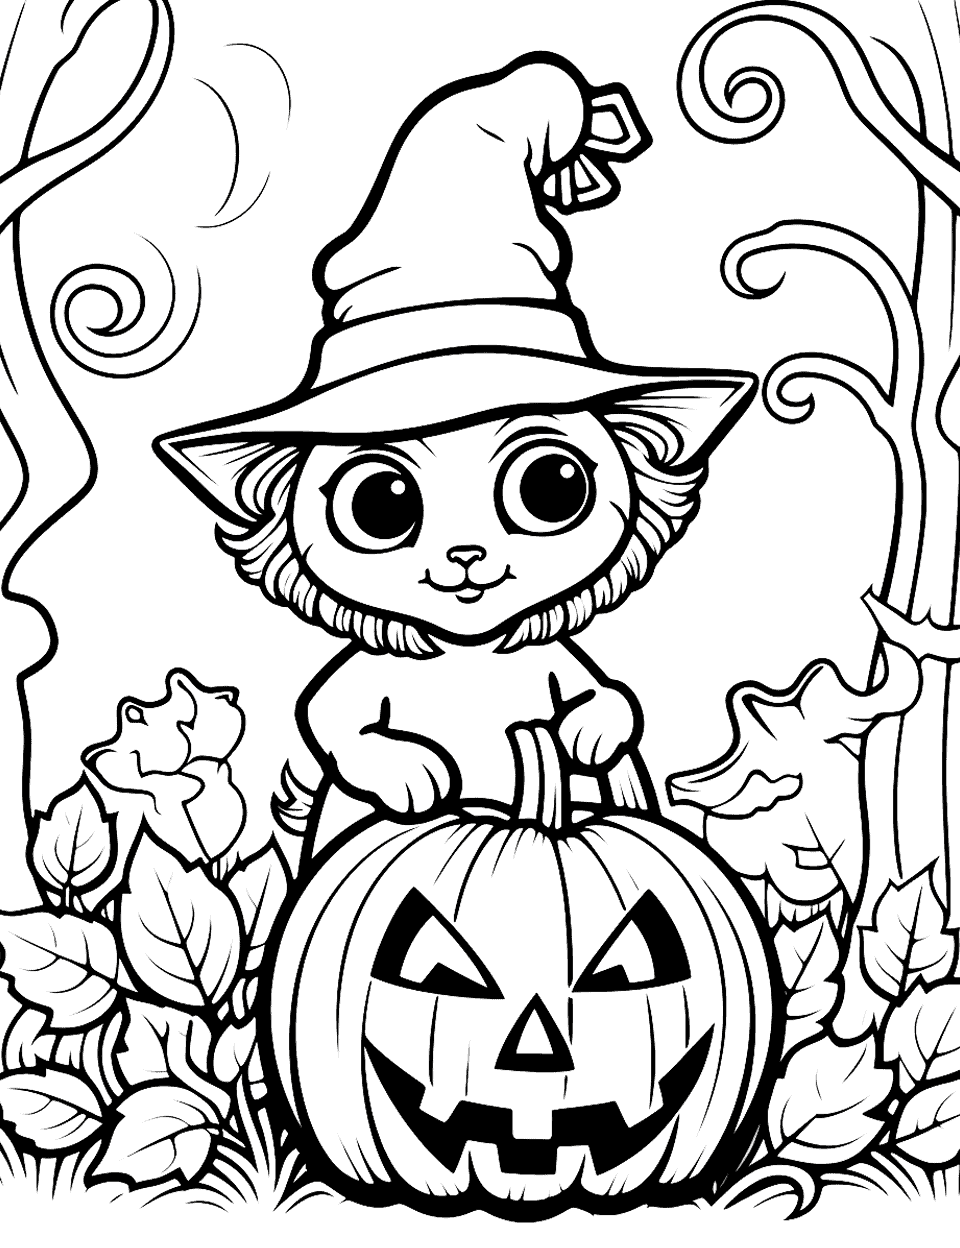 Halloween Black Cat Coloring Page - An adorable black cat with wide, surprised eyes standing against a Halloween-themed backdrop.